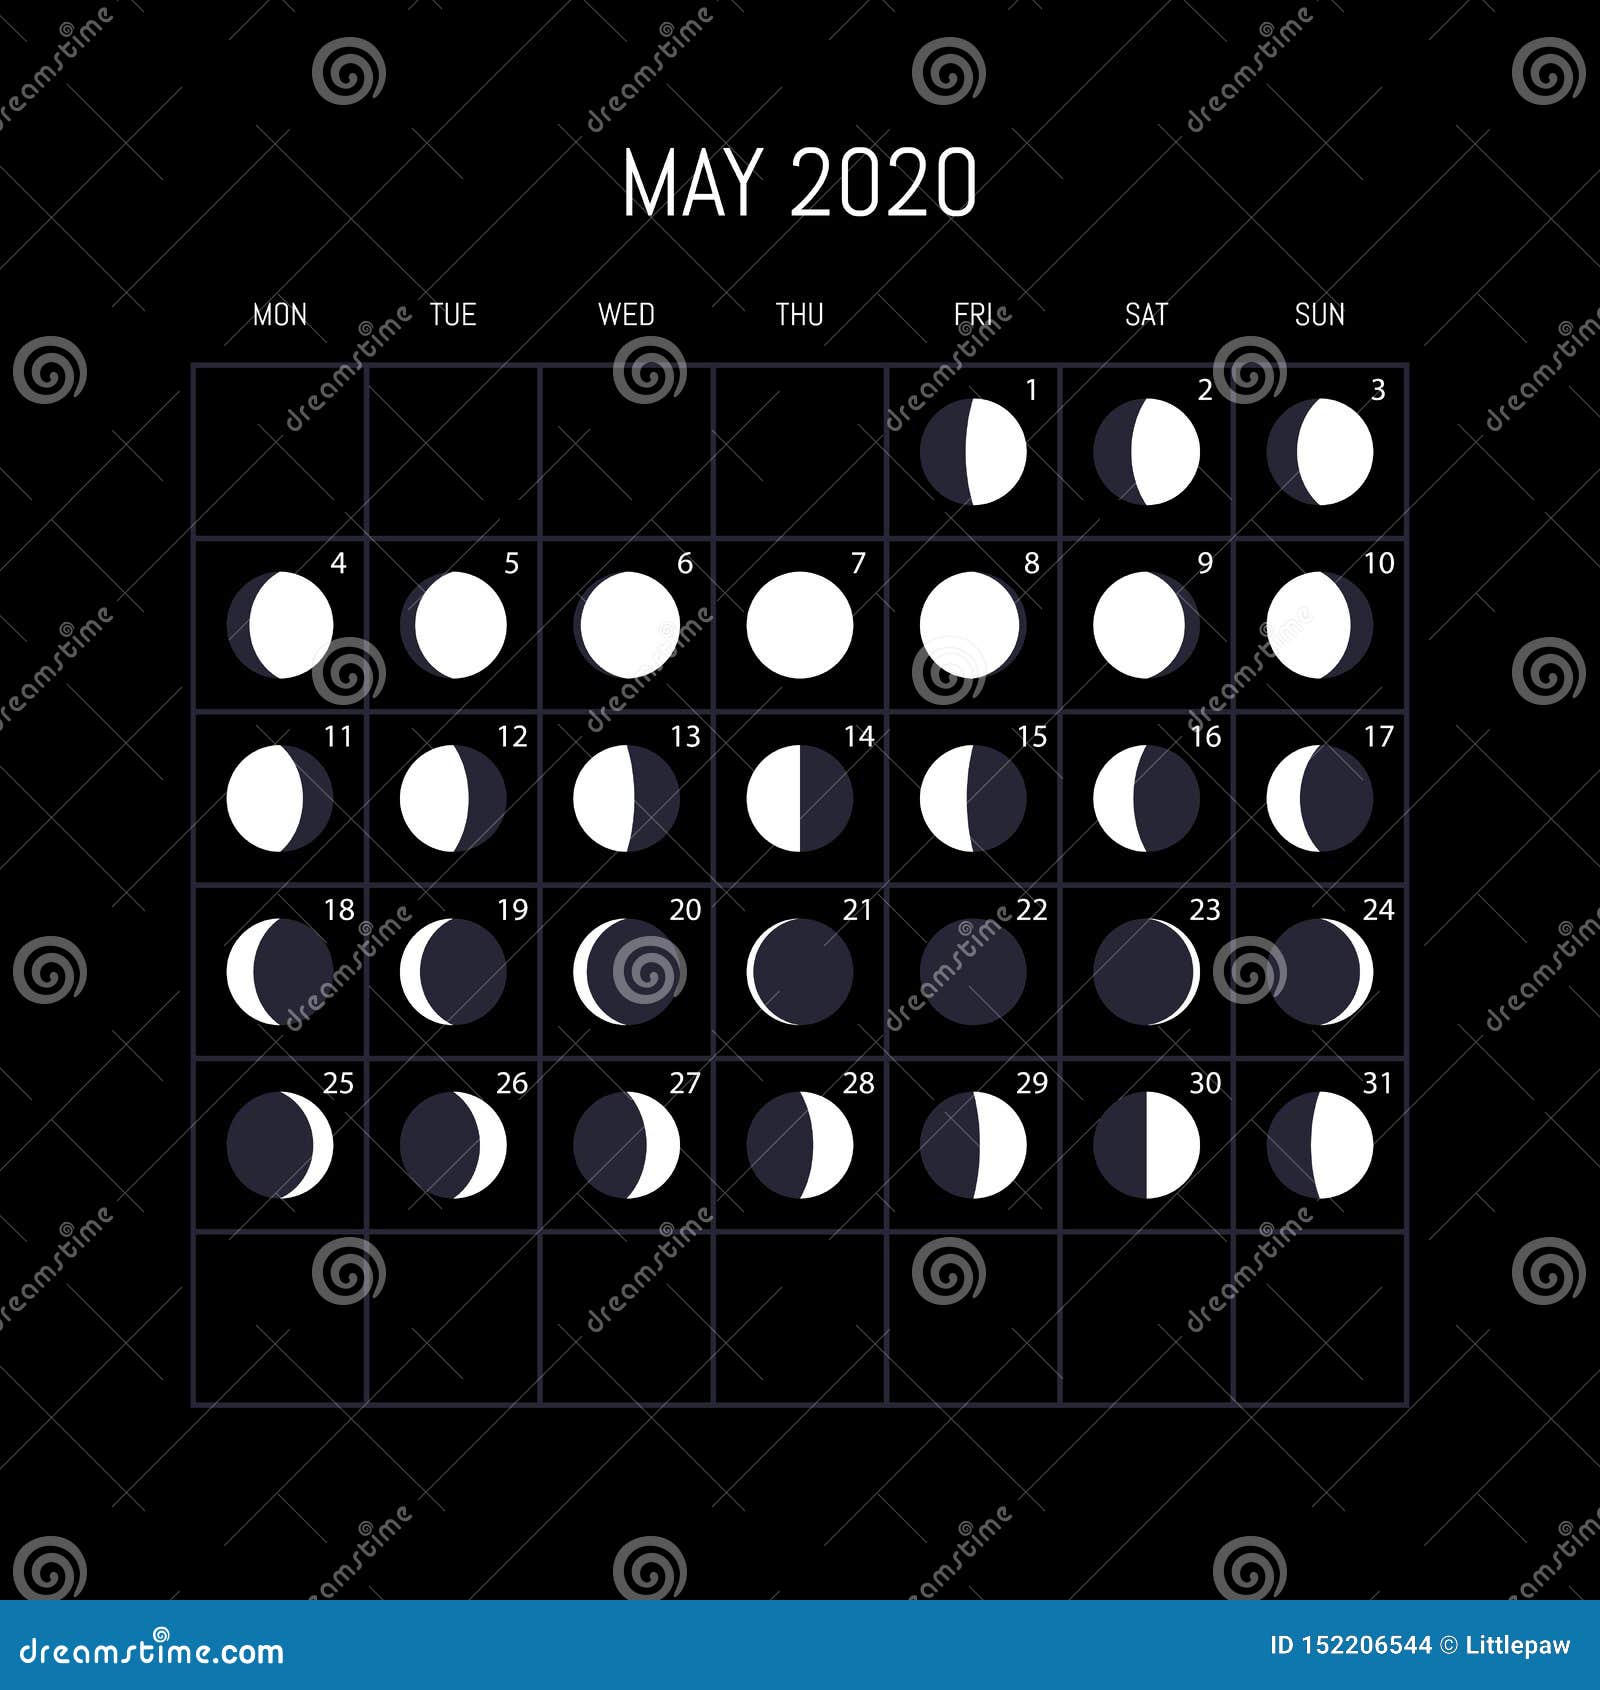 Moon Phases Calendar For 2020 Year May Night Background Design Vector Illustration Stock Vector Illustration Of Crescent Object 152206544